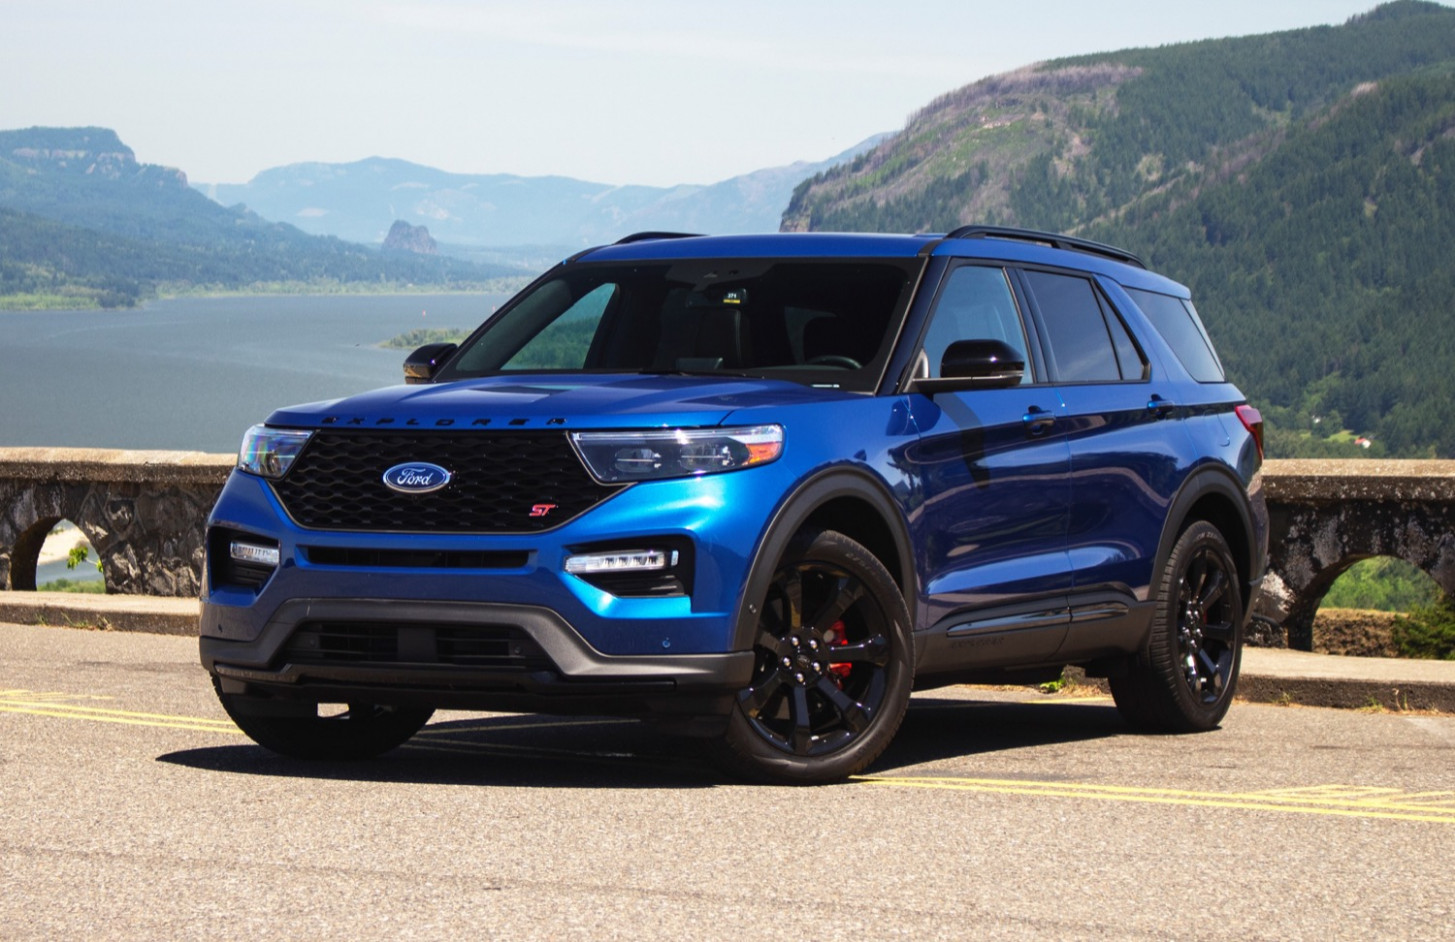 Exterior 2022 Ford Explorer Xlt Specs New Cars Design | All in one Photos